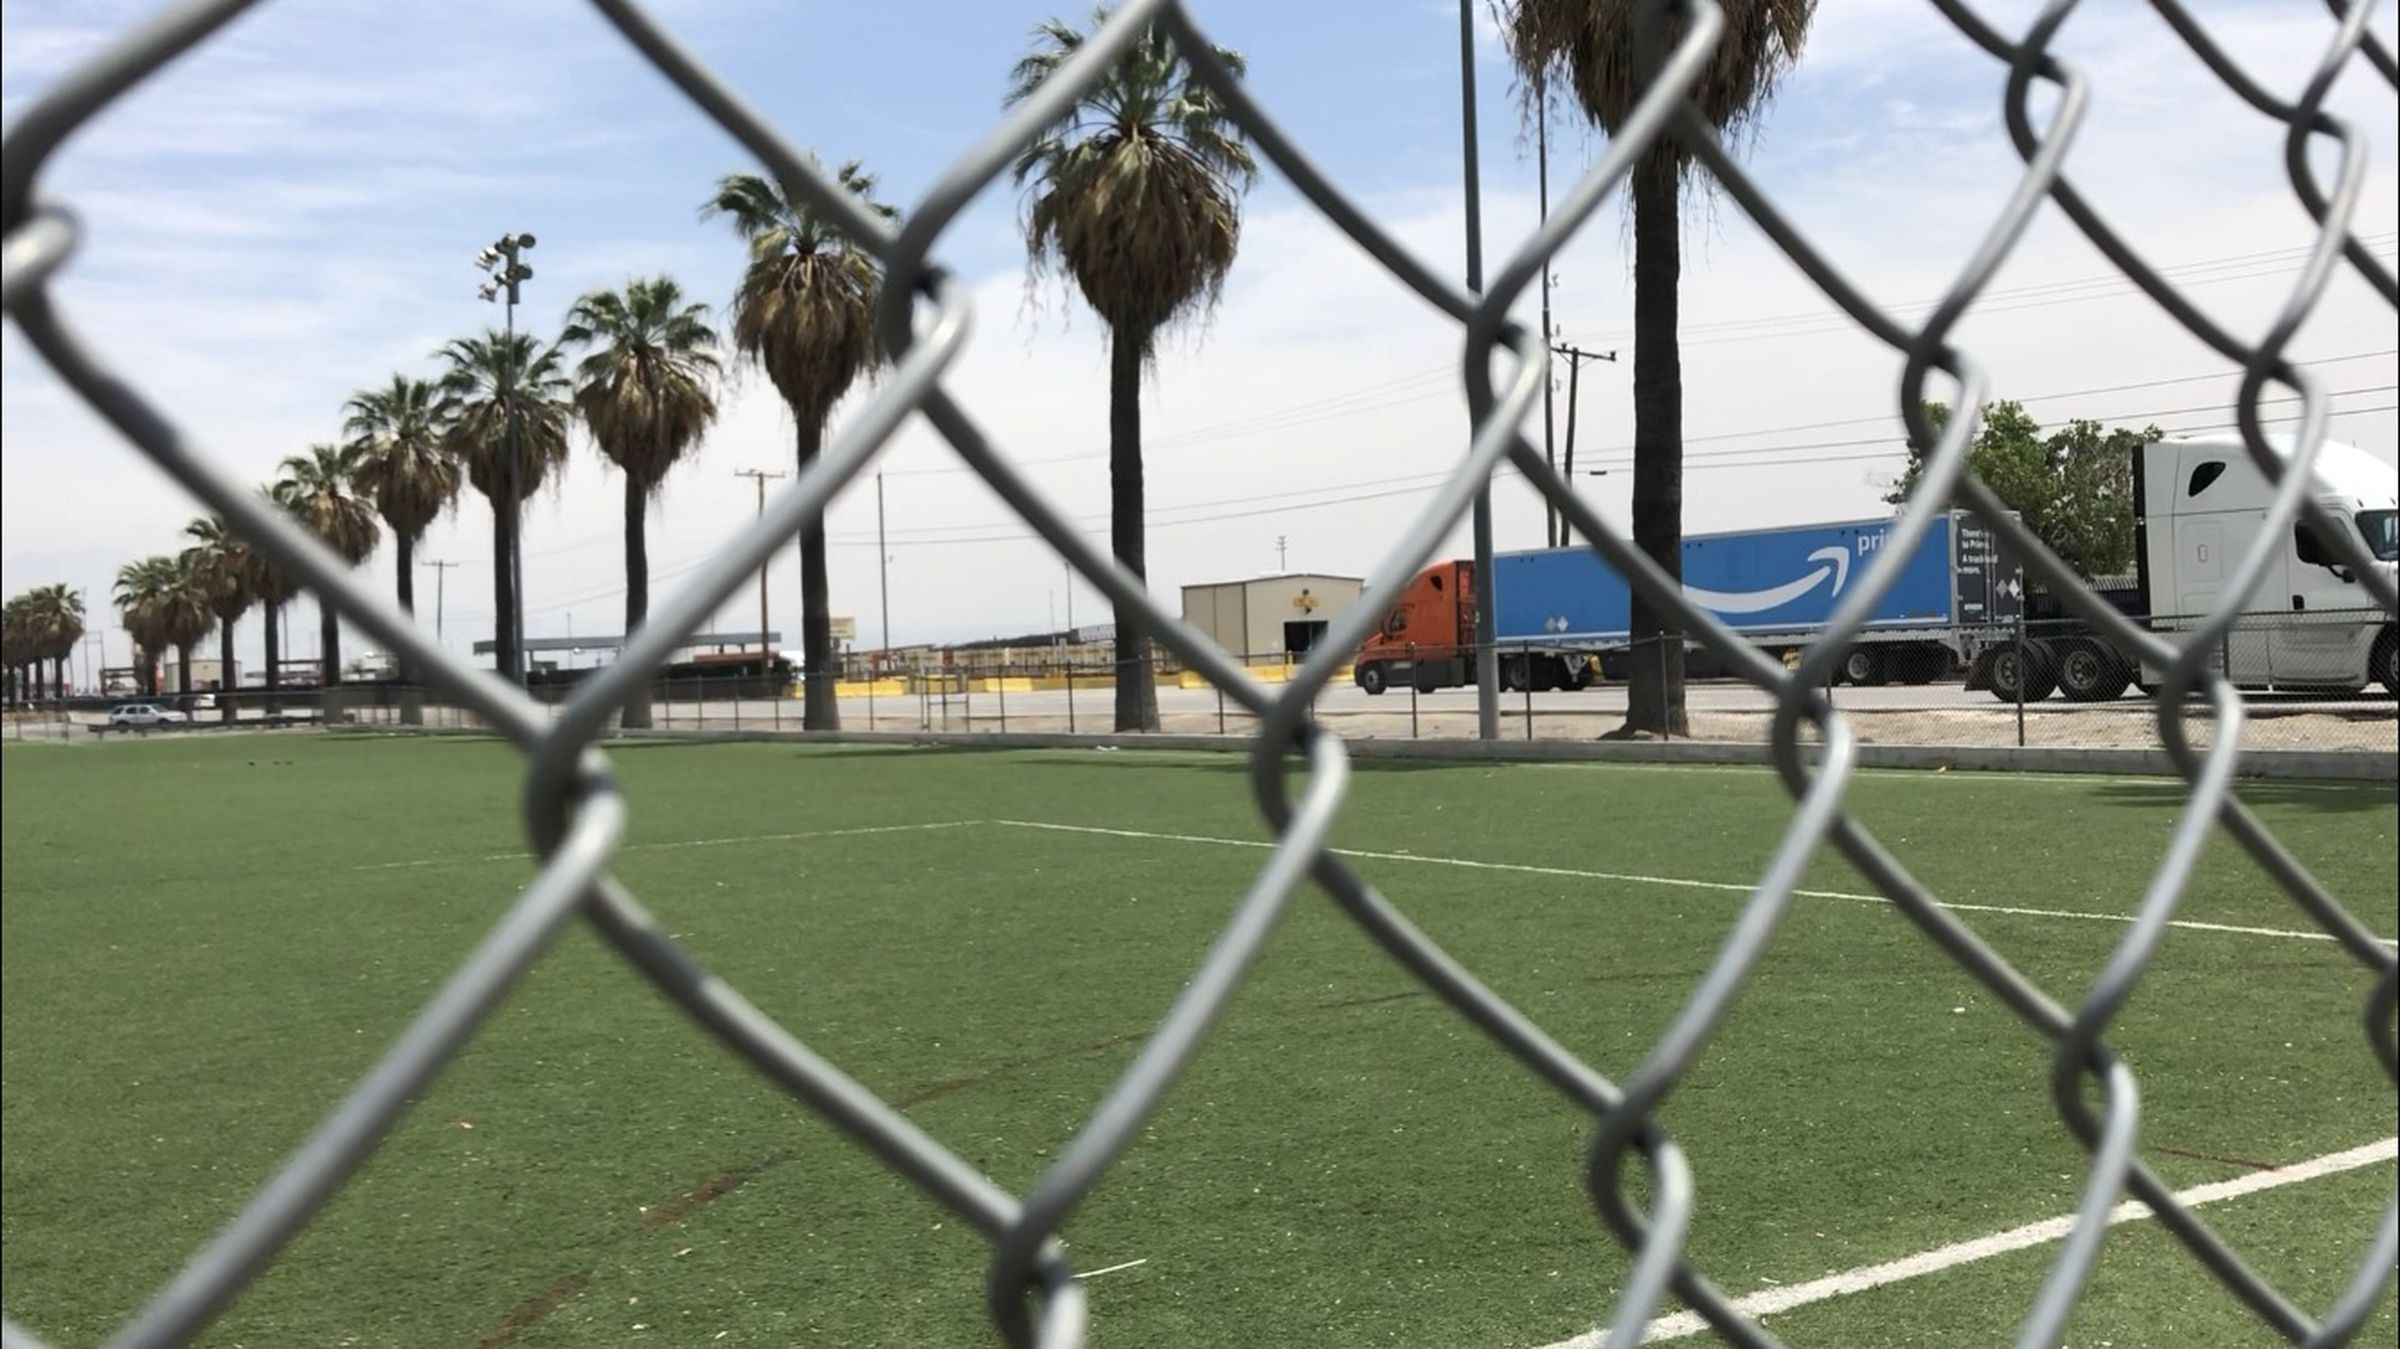 An Amazon Prime truck drives into the BNSF rail yard across the street from a soccer field and community center in San Bernardino, California.